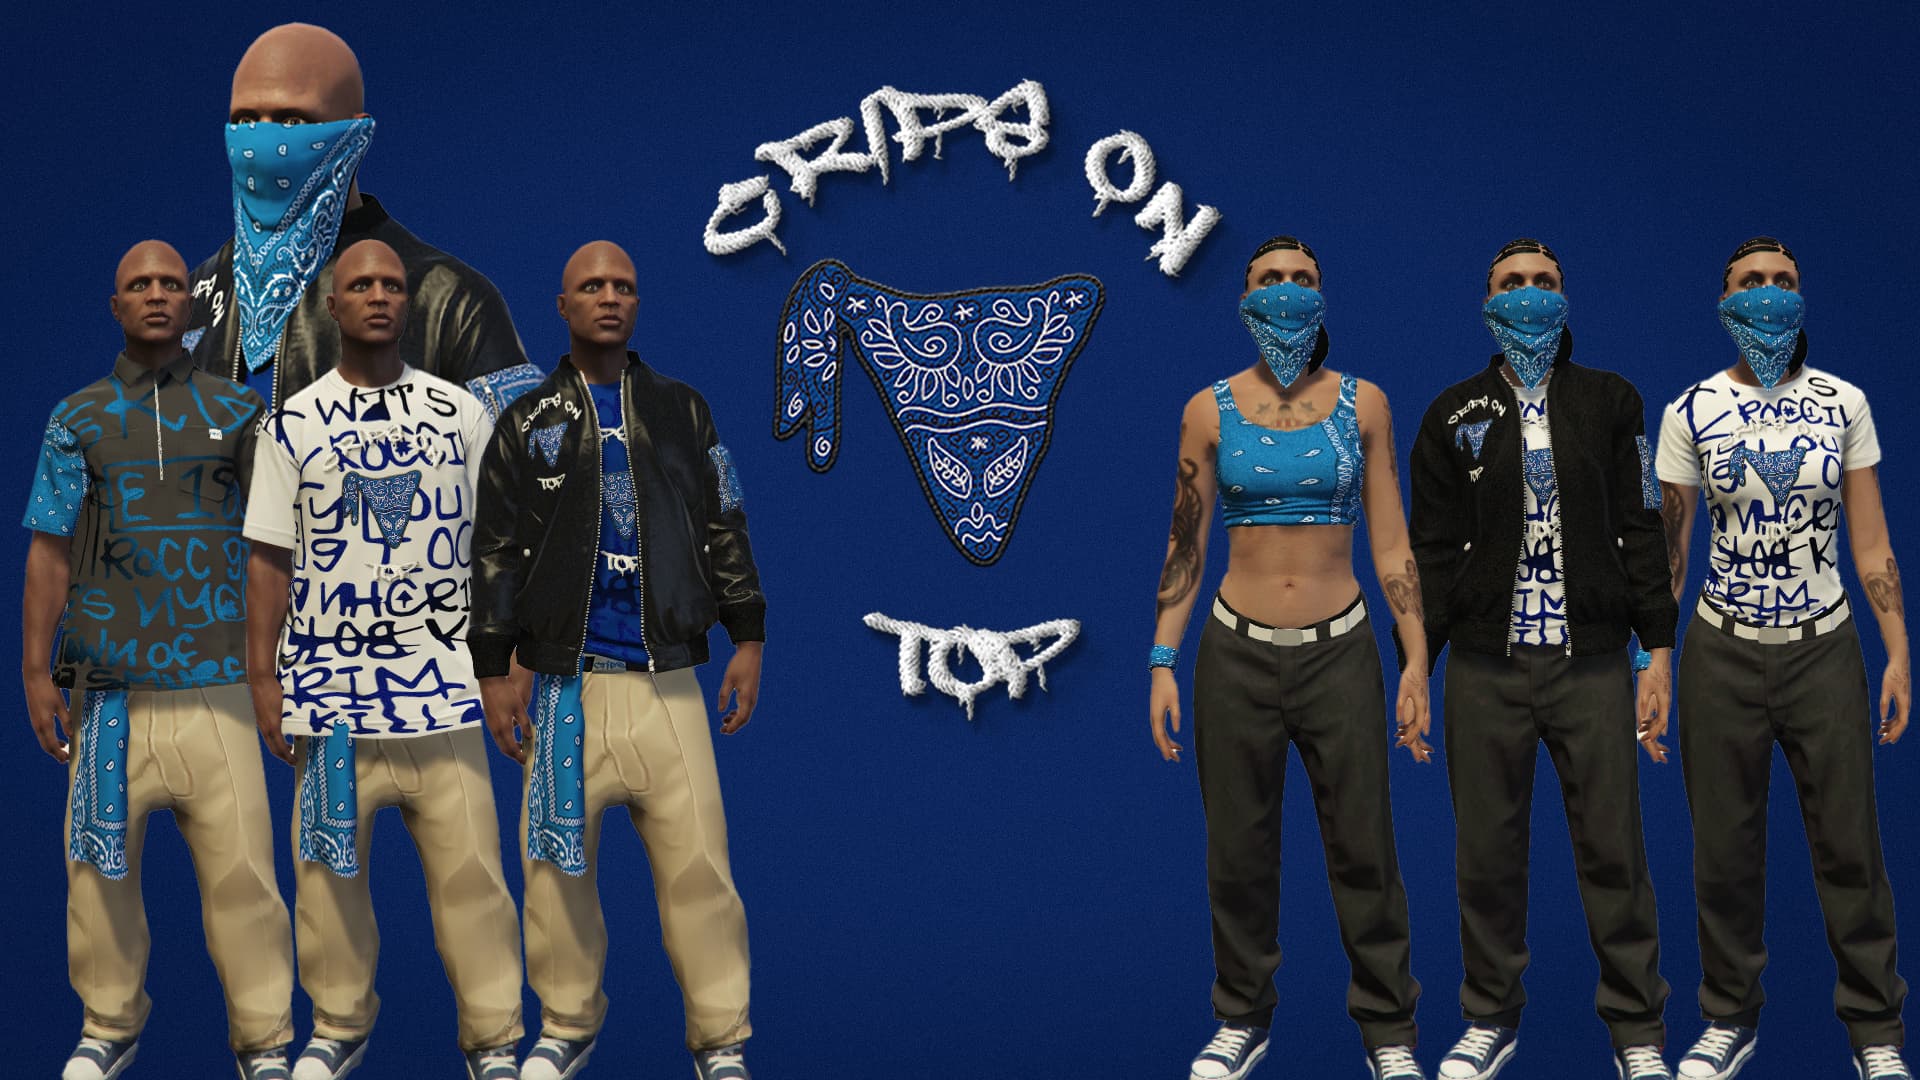 Gang Modz] Bloods and Crips 